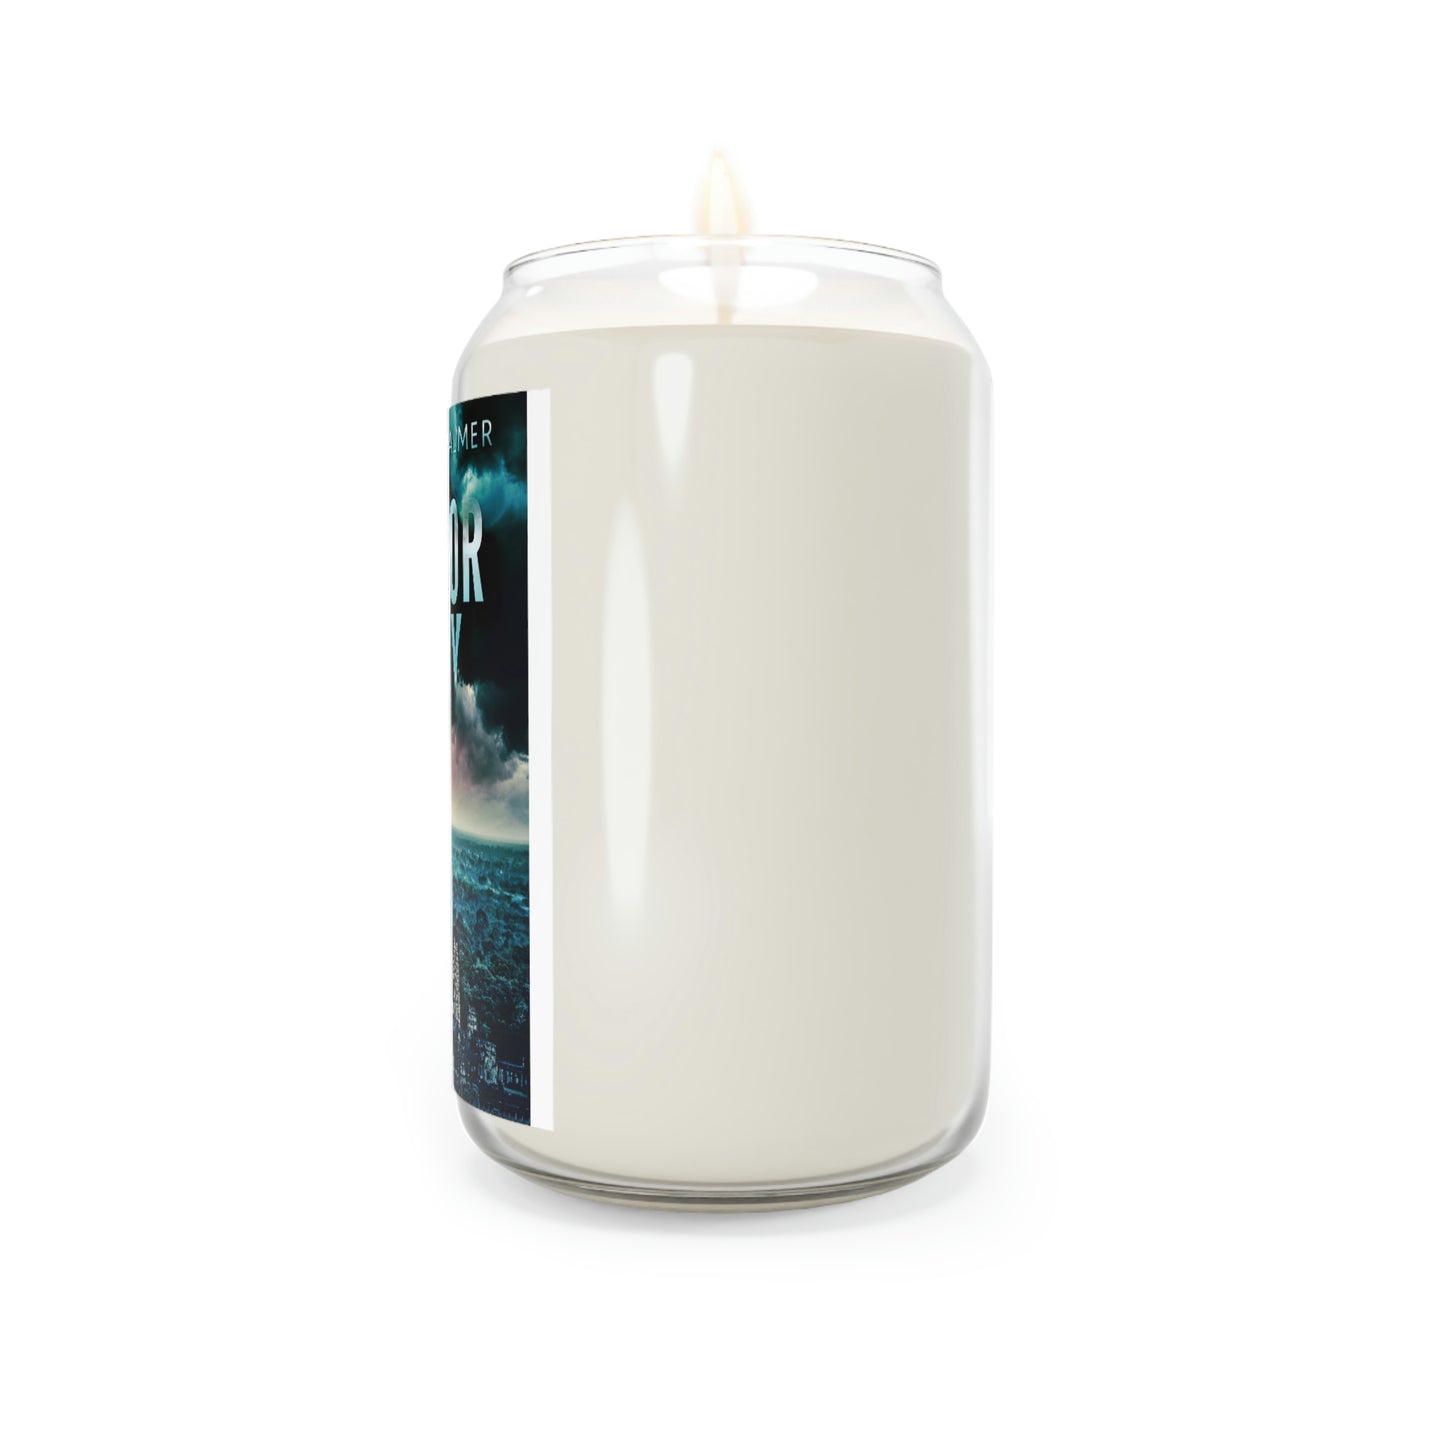 Angkor Away - Scented Candle